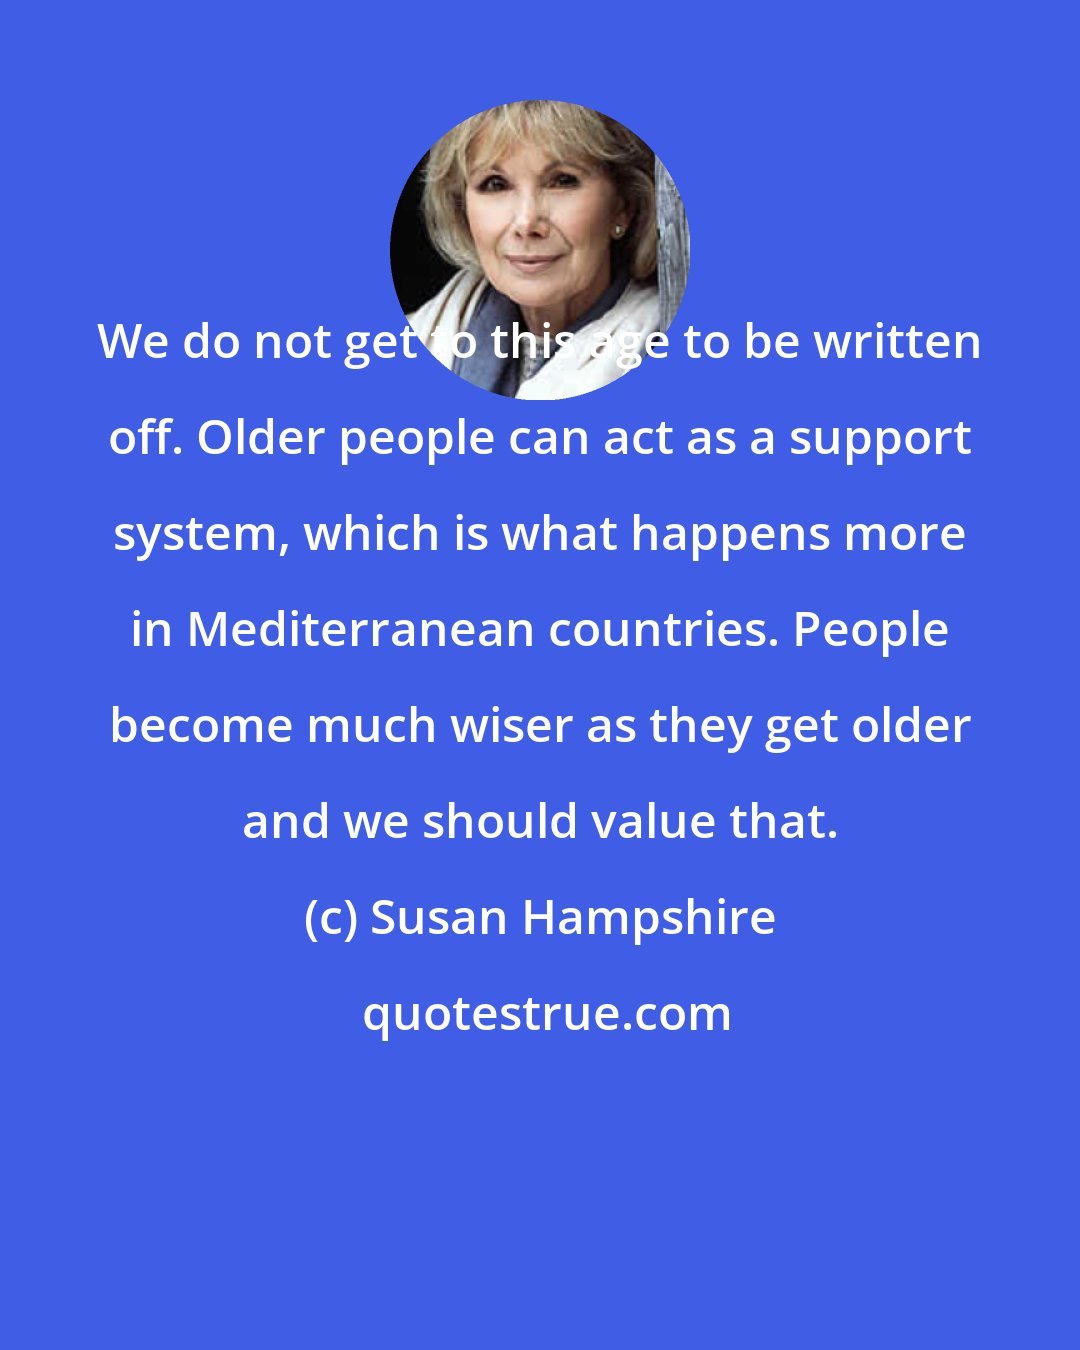 Susan Hampshire: We do not get to this age to be written off. Older people can act as a support system, which is what happens more in Mediterranean countries. People become much wiser as they get older and we should value that.